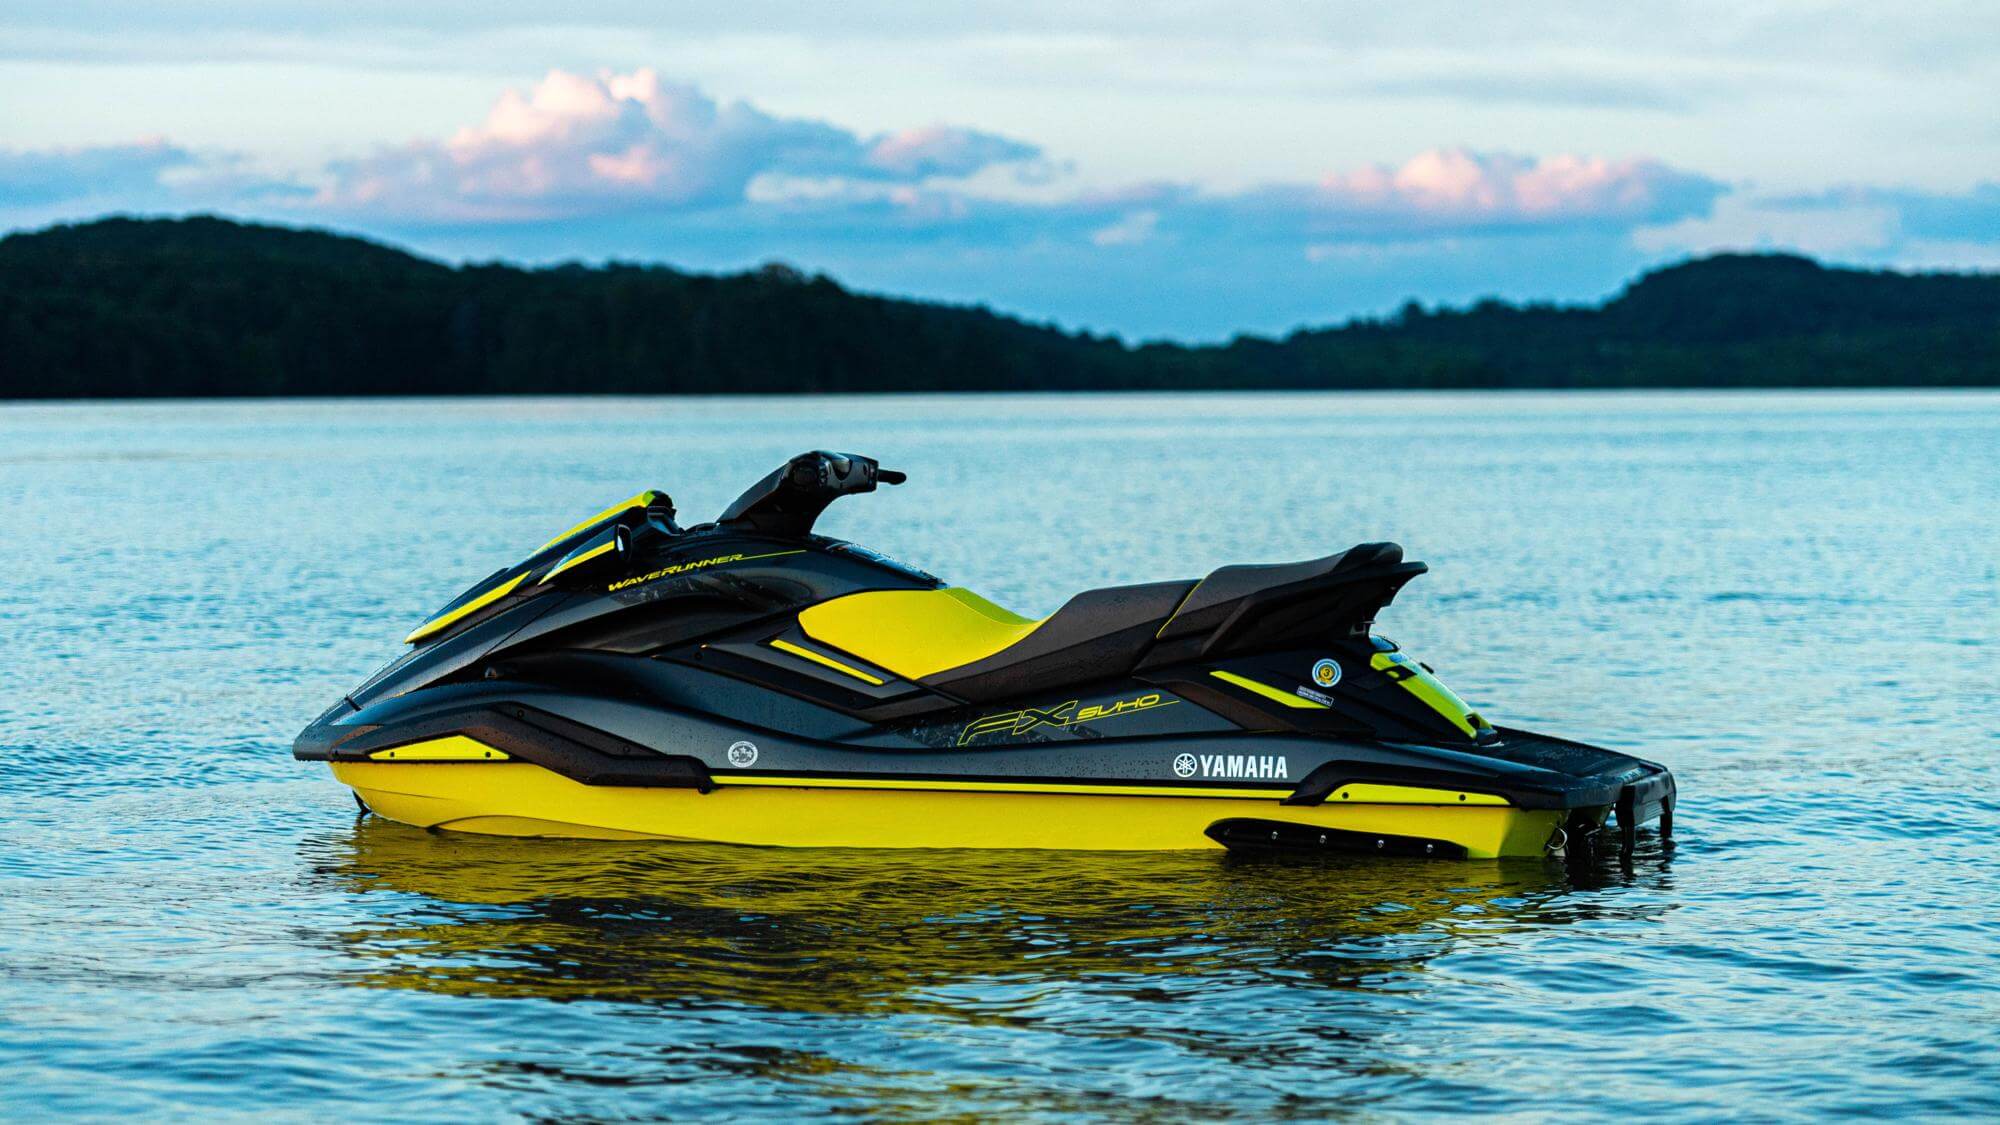 a yellow and black jet ski sat in the water with no one riding on it